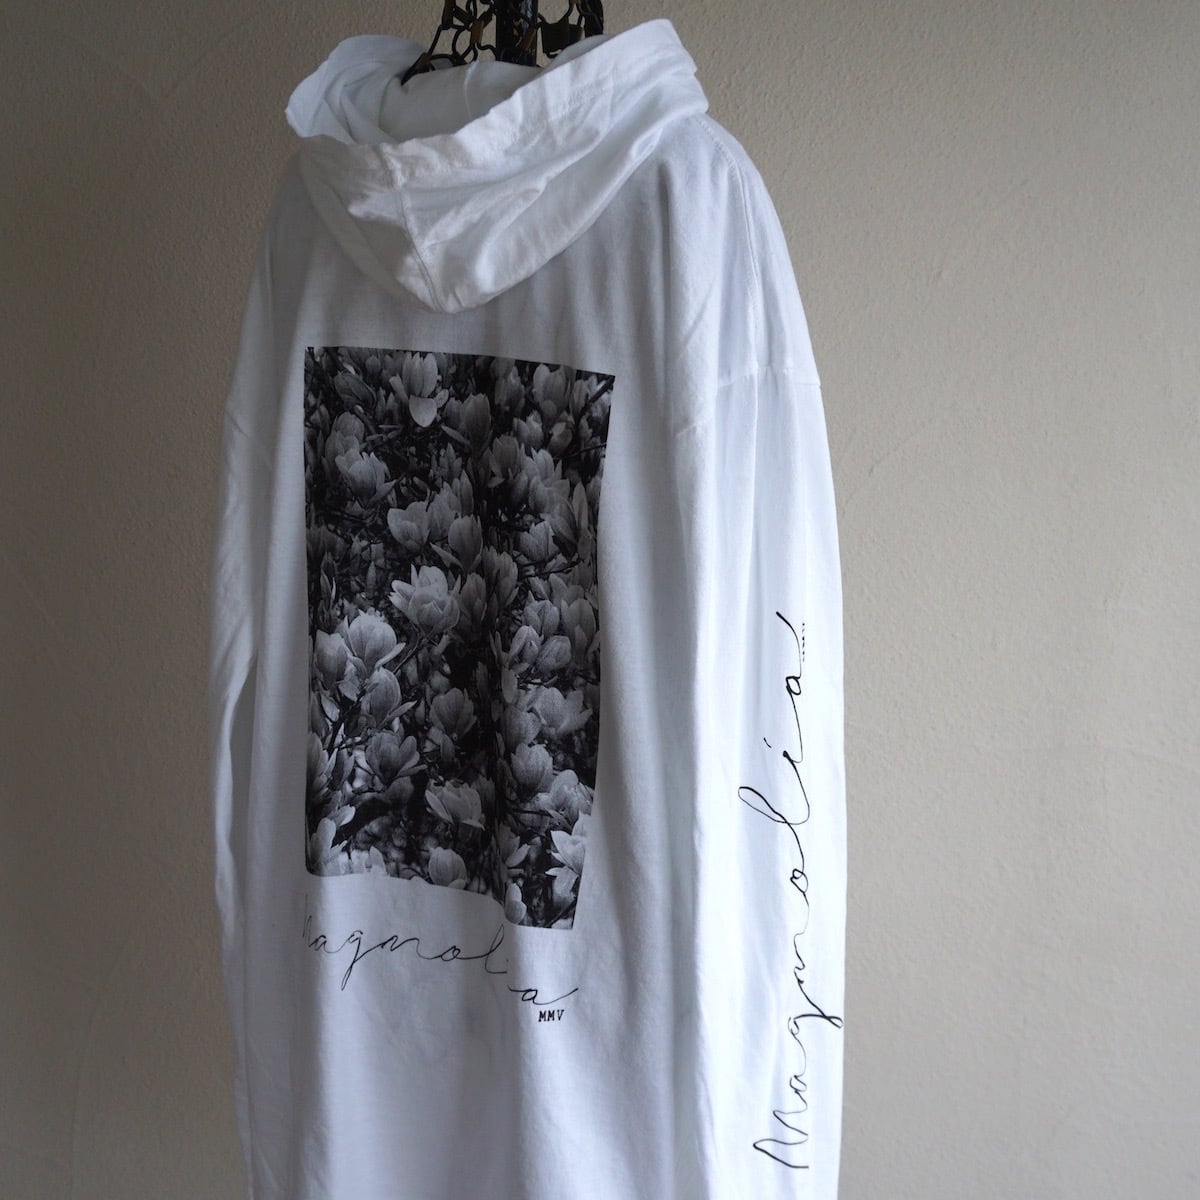 MAGNOLIA "Full Bloom & Sway" HOODED L/S T SHIRT color:WHITE size:S